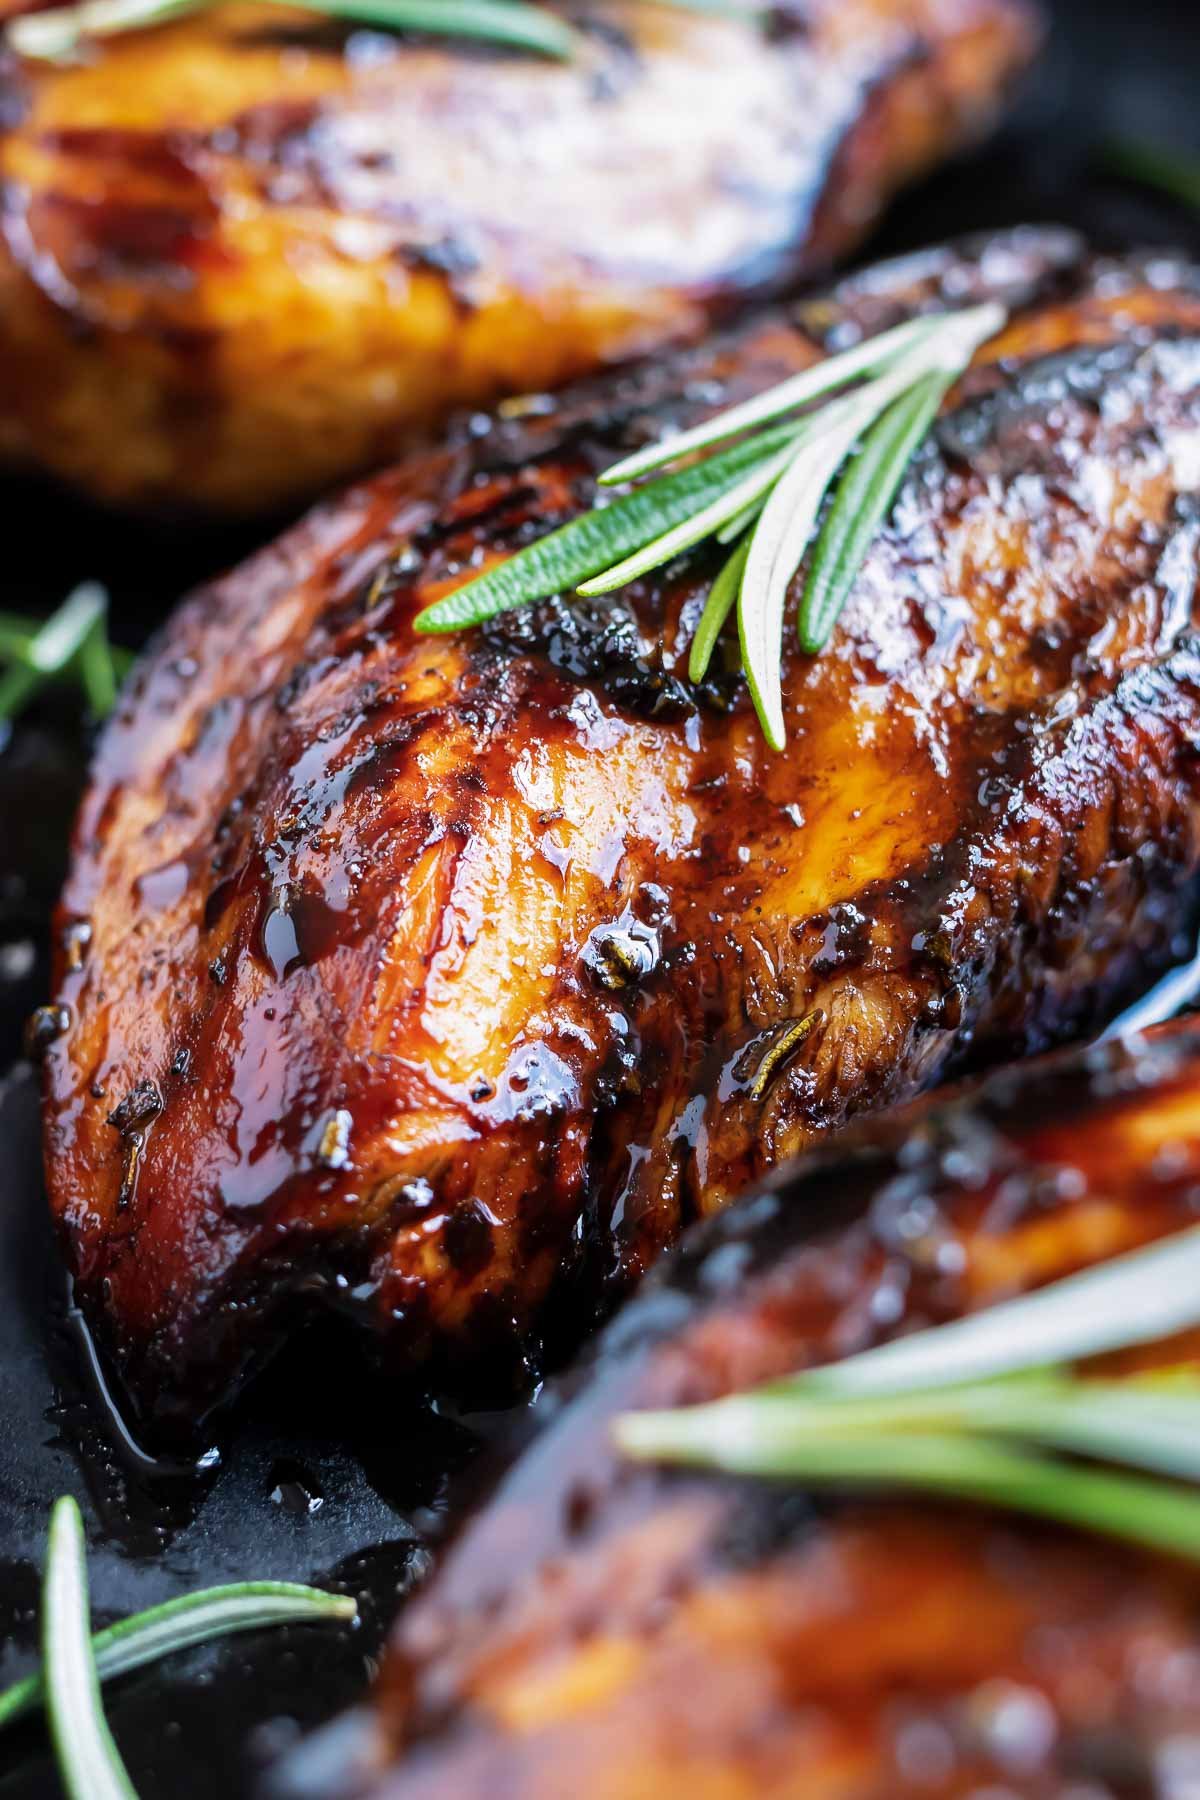 Juicy chicken breast recipe that is covered in a honey balsamic glaze.